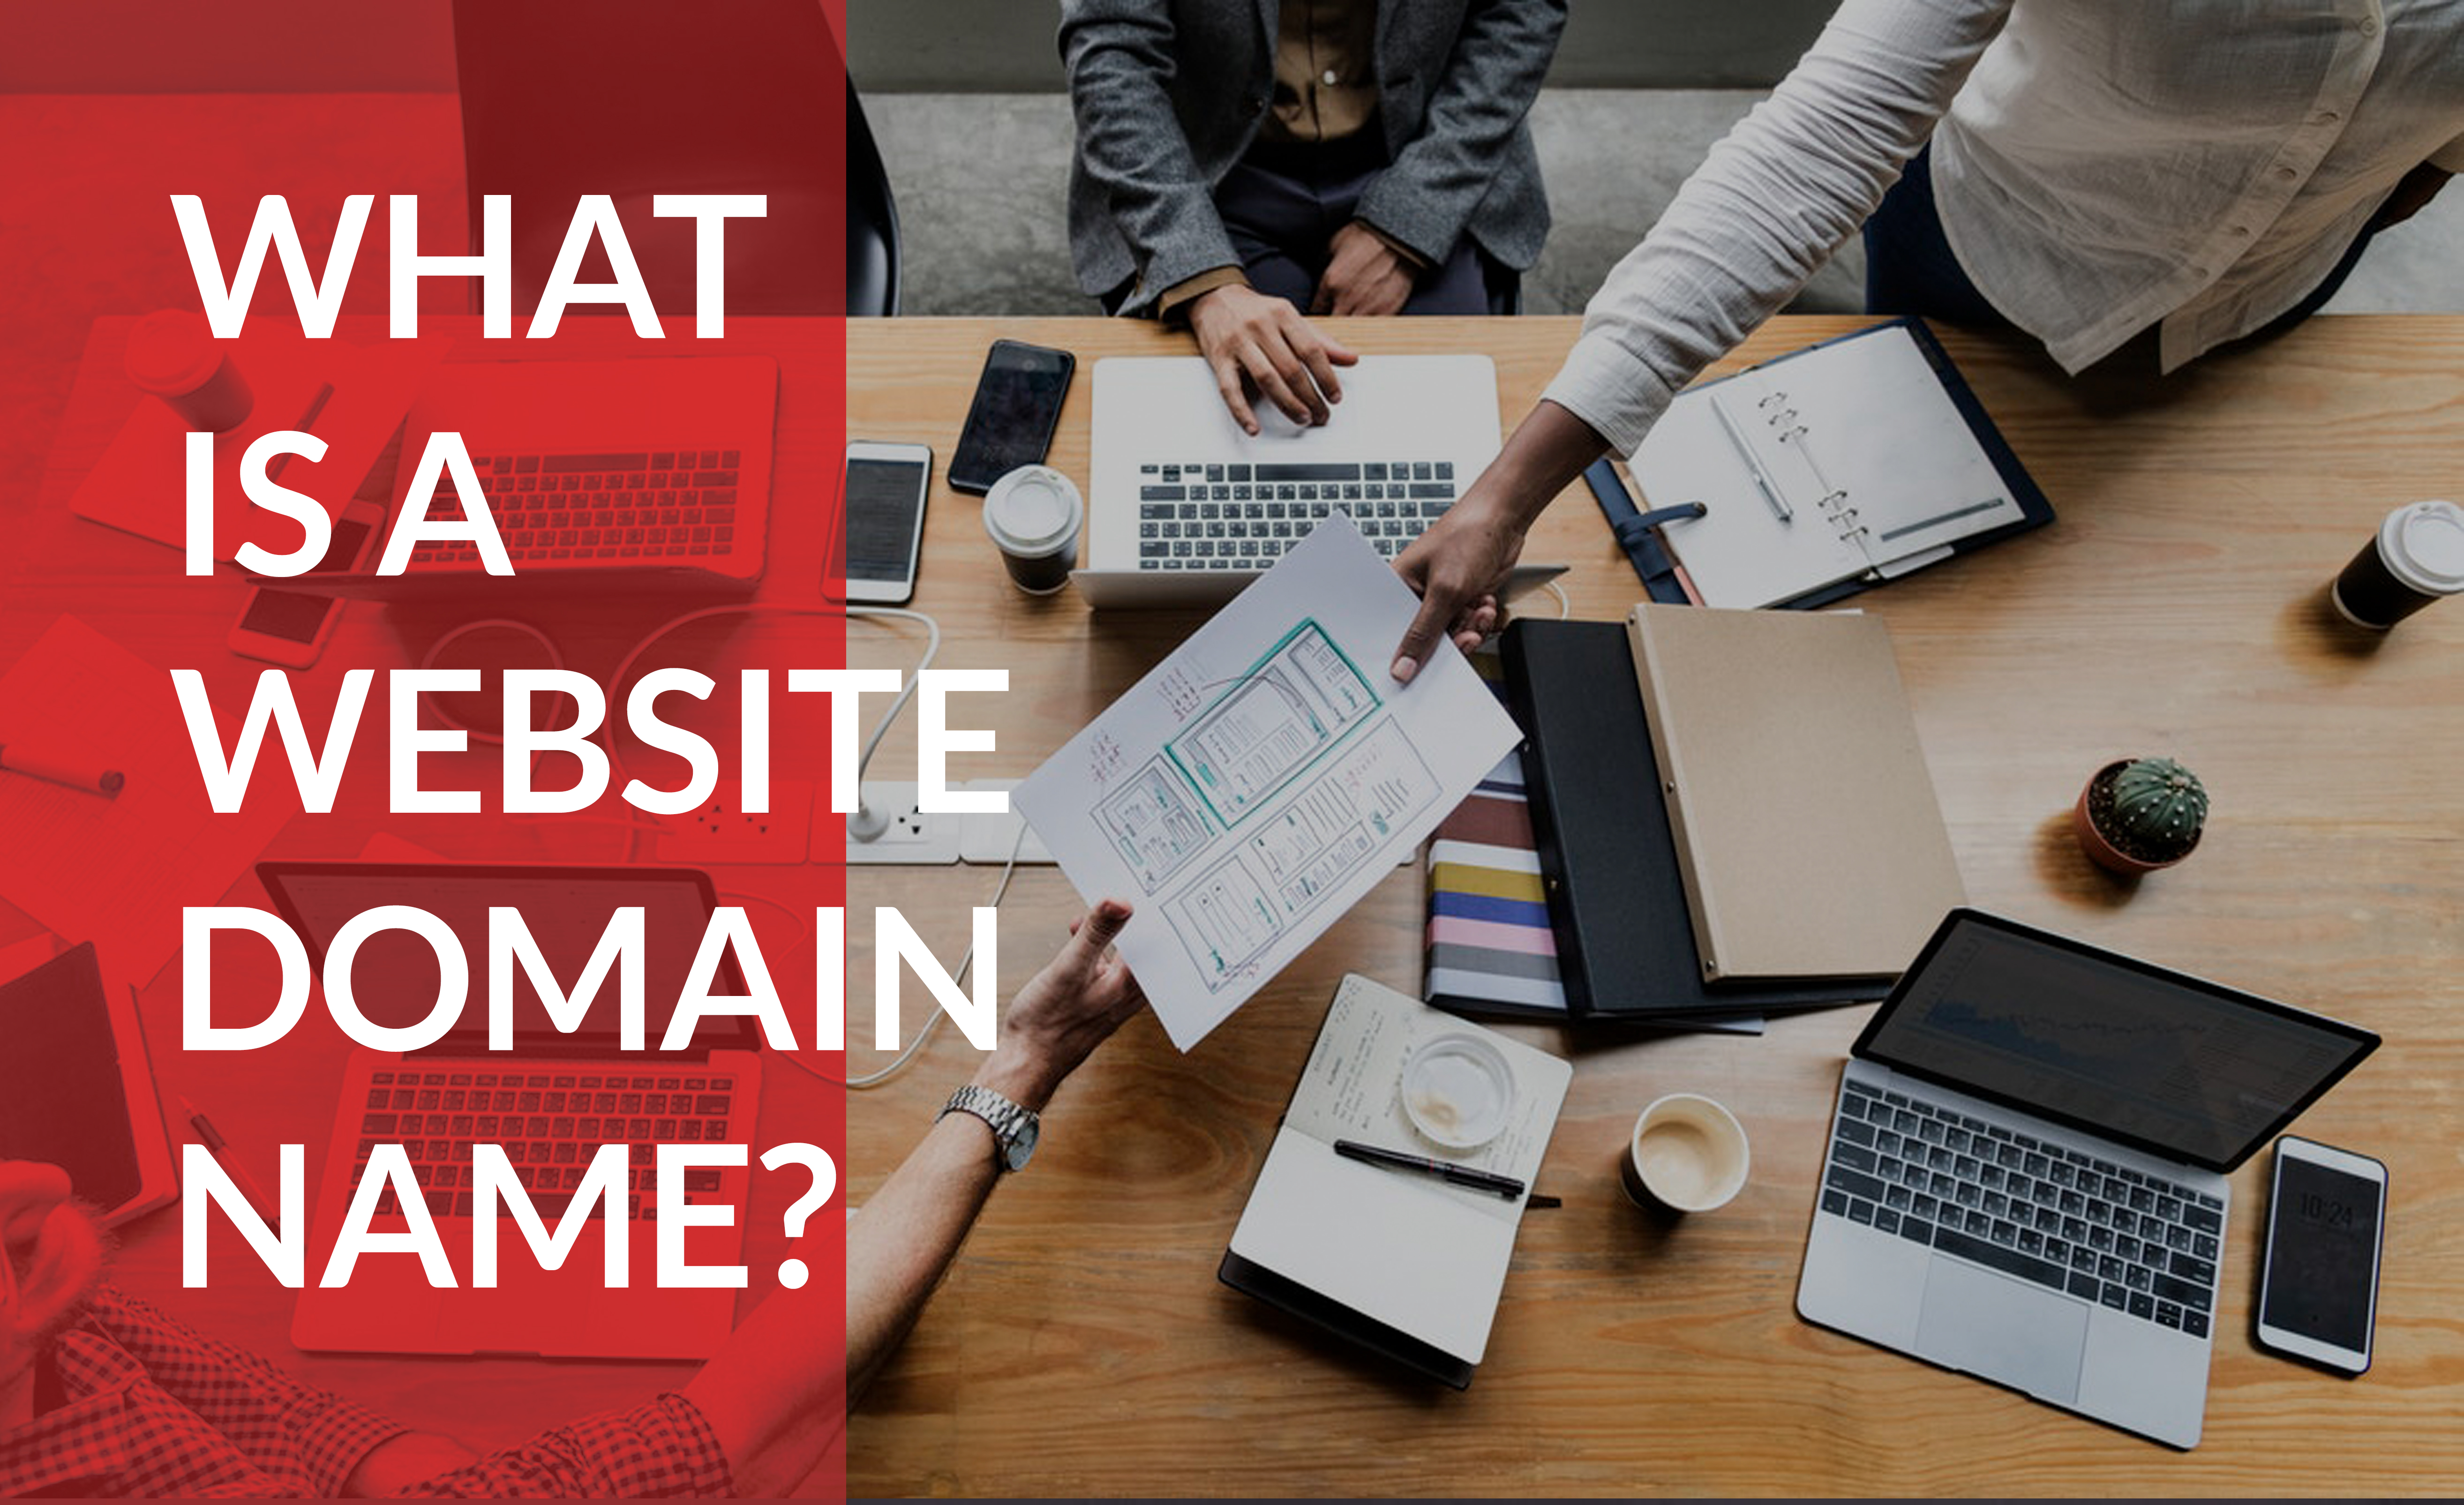 Learn how domain names work so you can choose one for your business idea.